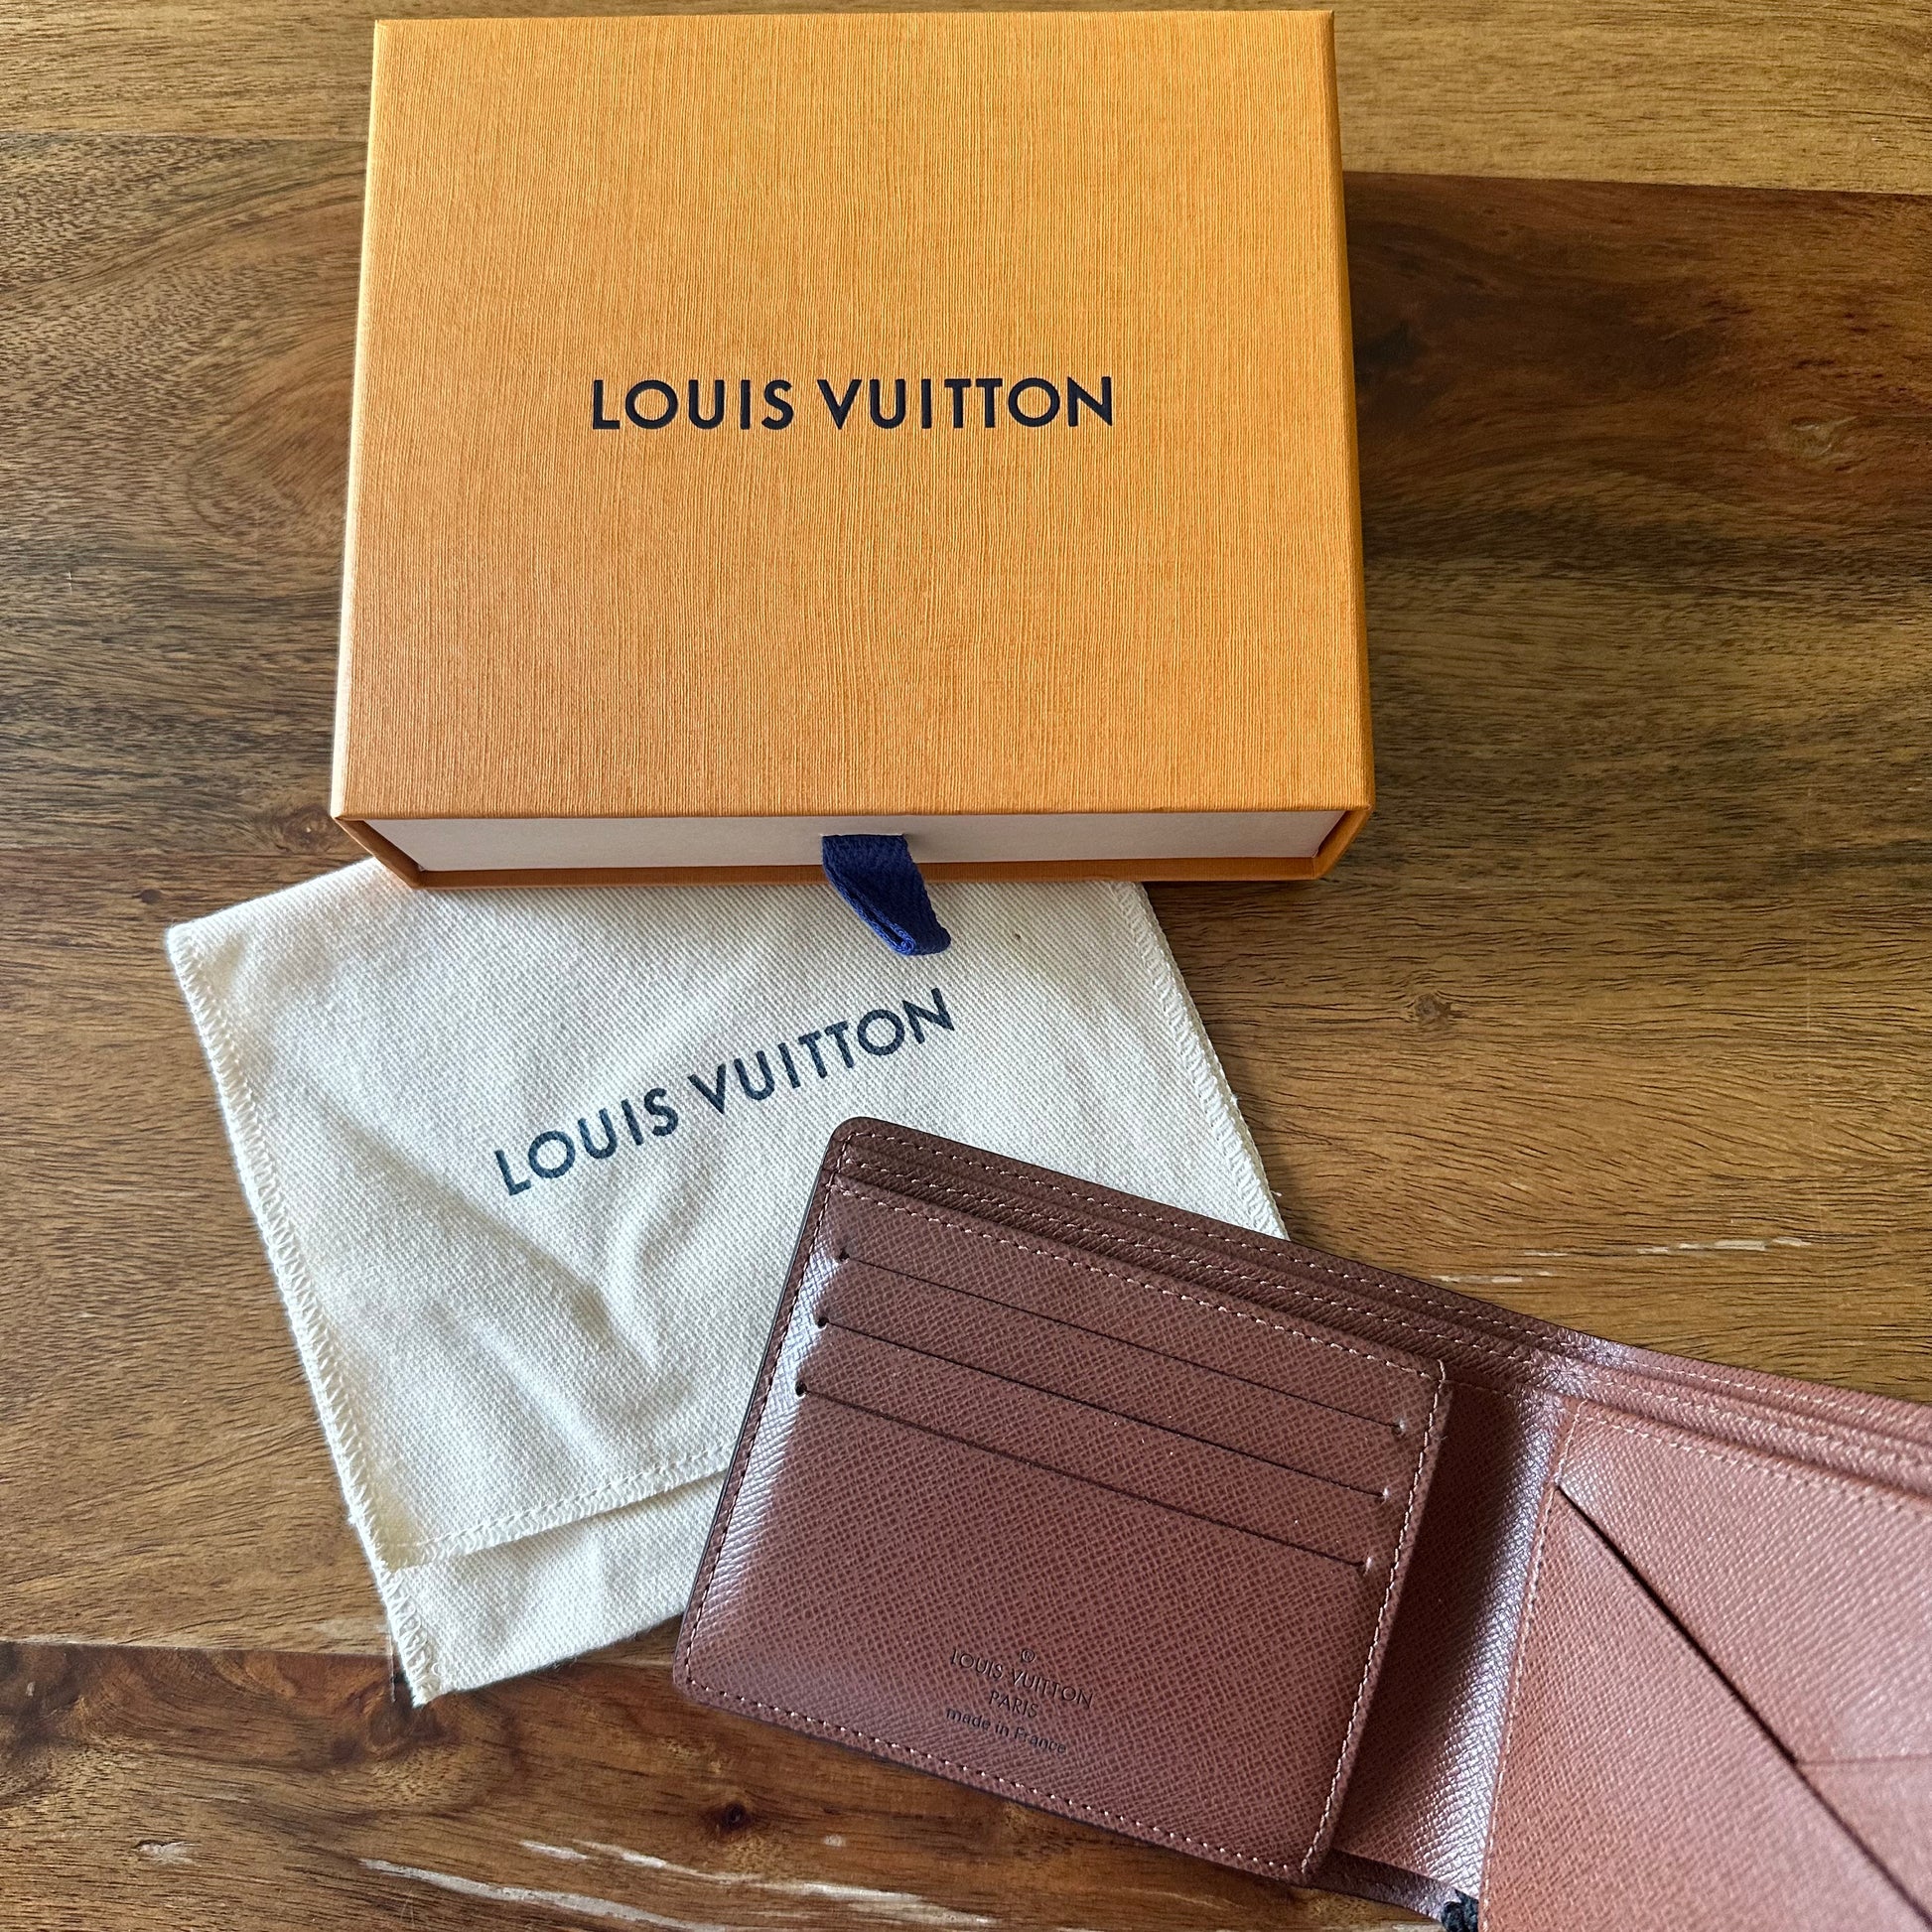 Multiple Wallet - Luxury Small Leather Goods - Personalisation, Men M60895